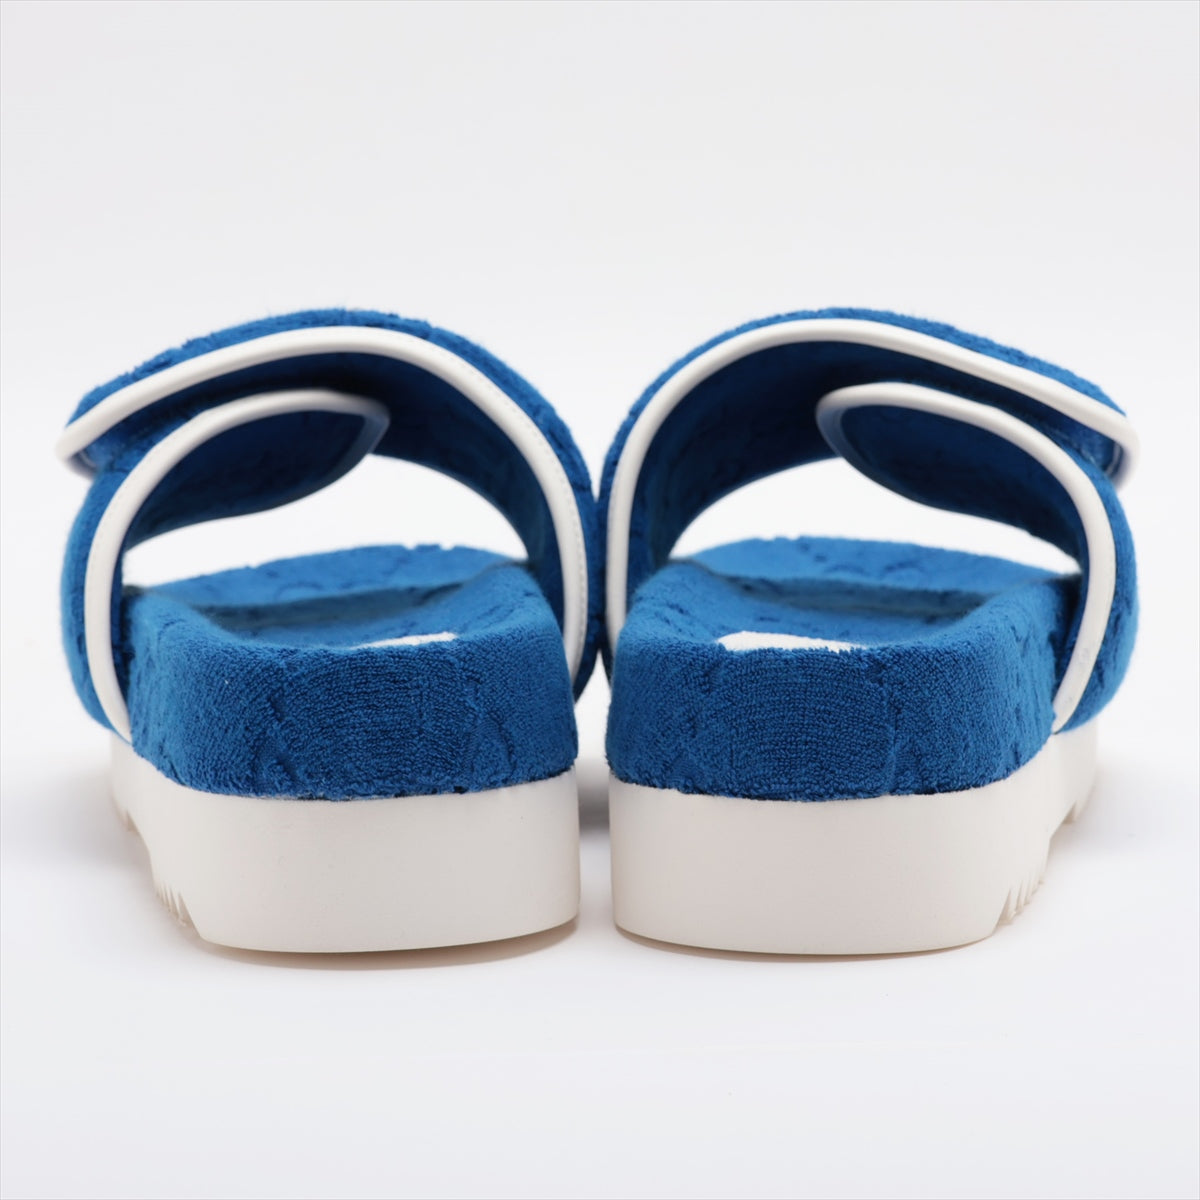 Gucci x Adidas GG Supreme Cotton & Peather Sandals 9 Men's Blue x white Box There is a storage bag